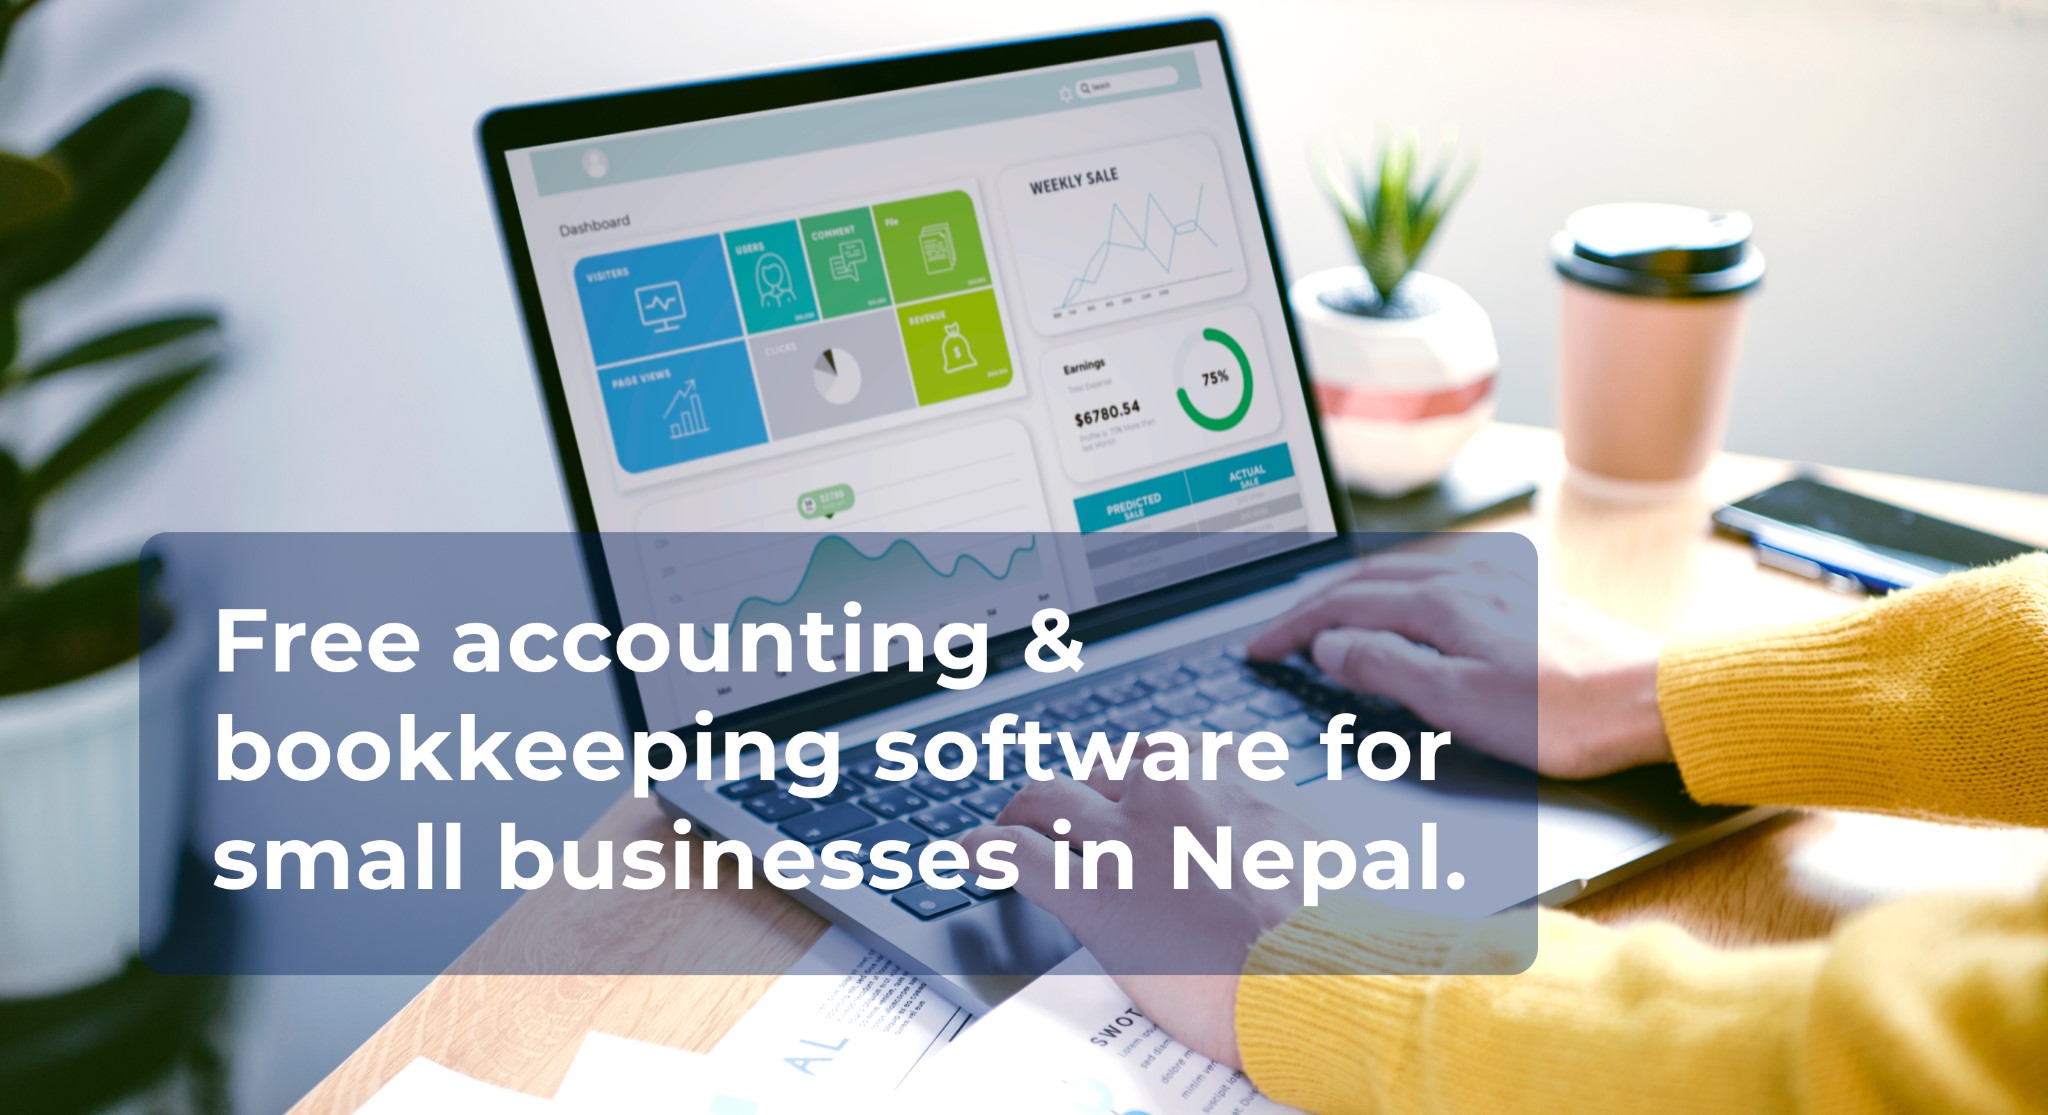 Best accounting software for small businesses in Nepal